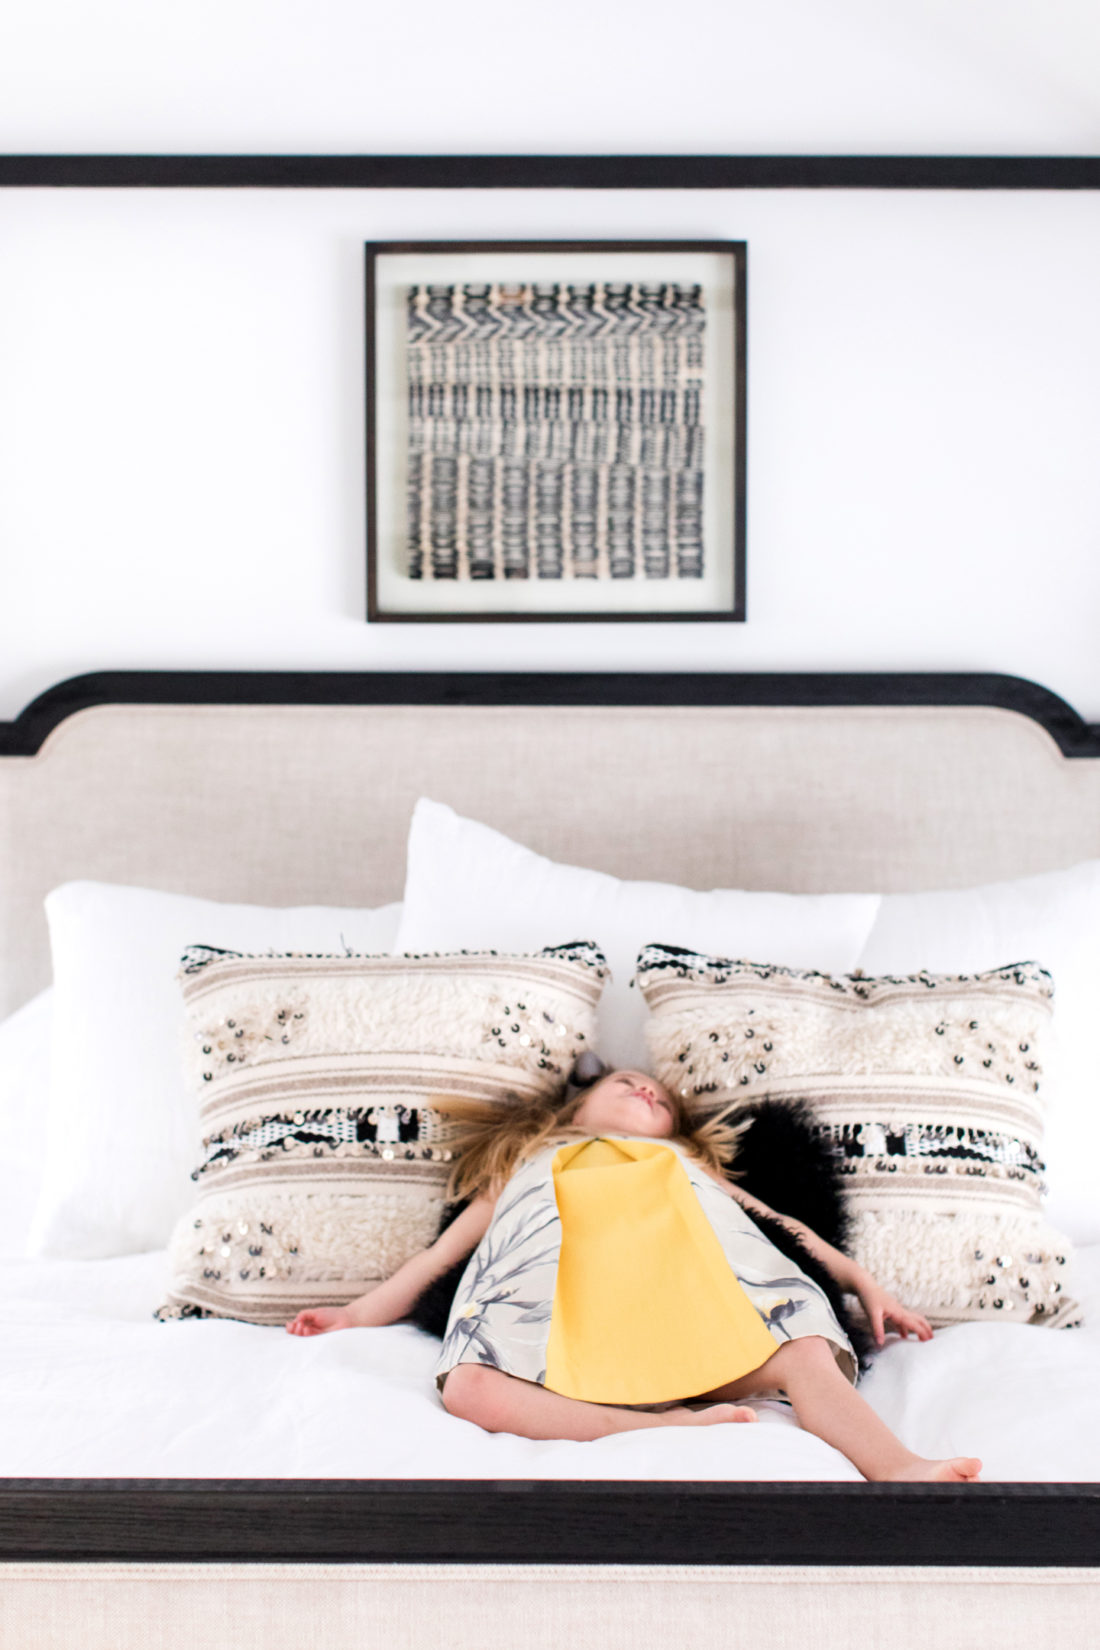 Marlowe Martino lays back on her Mom's black and white patterned bed pillows